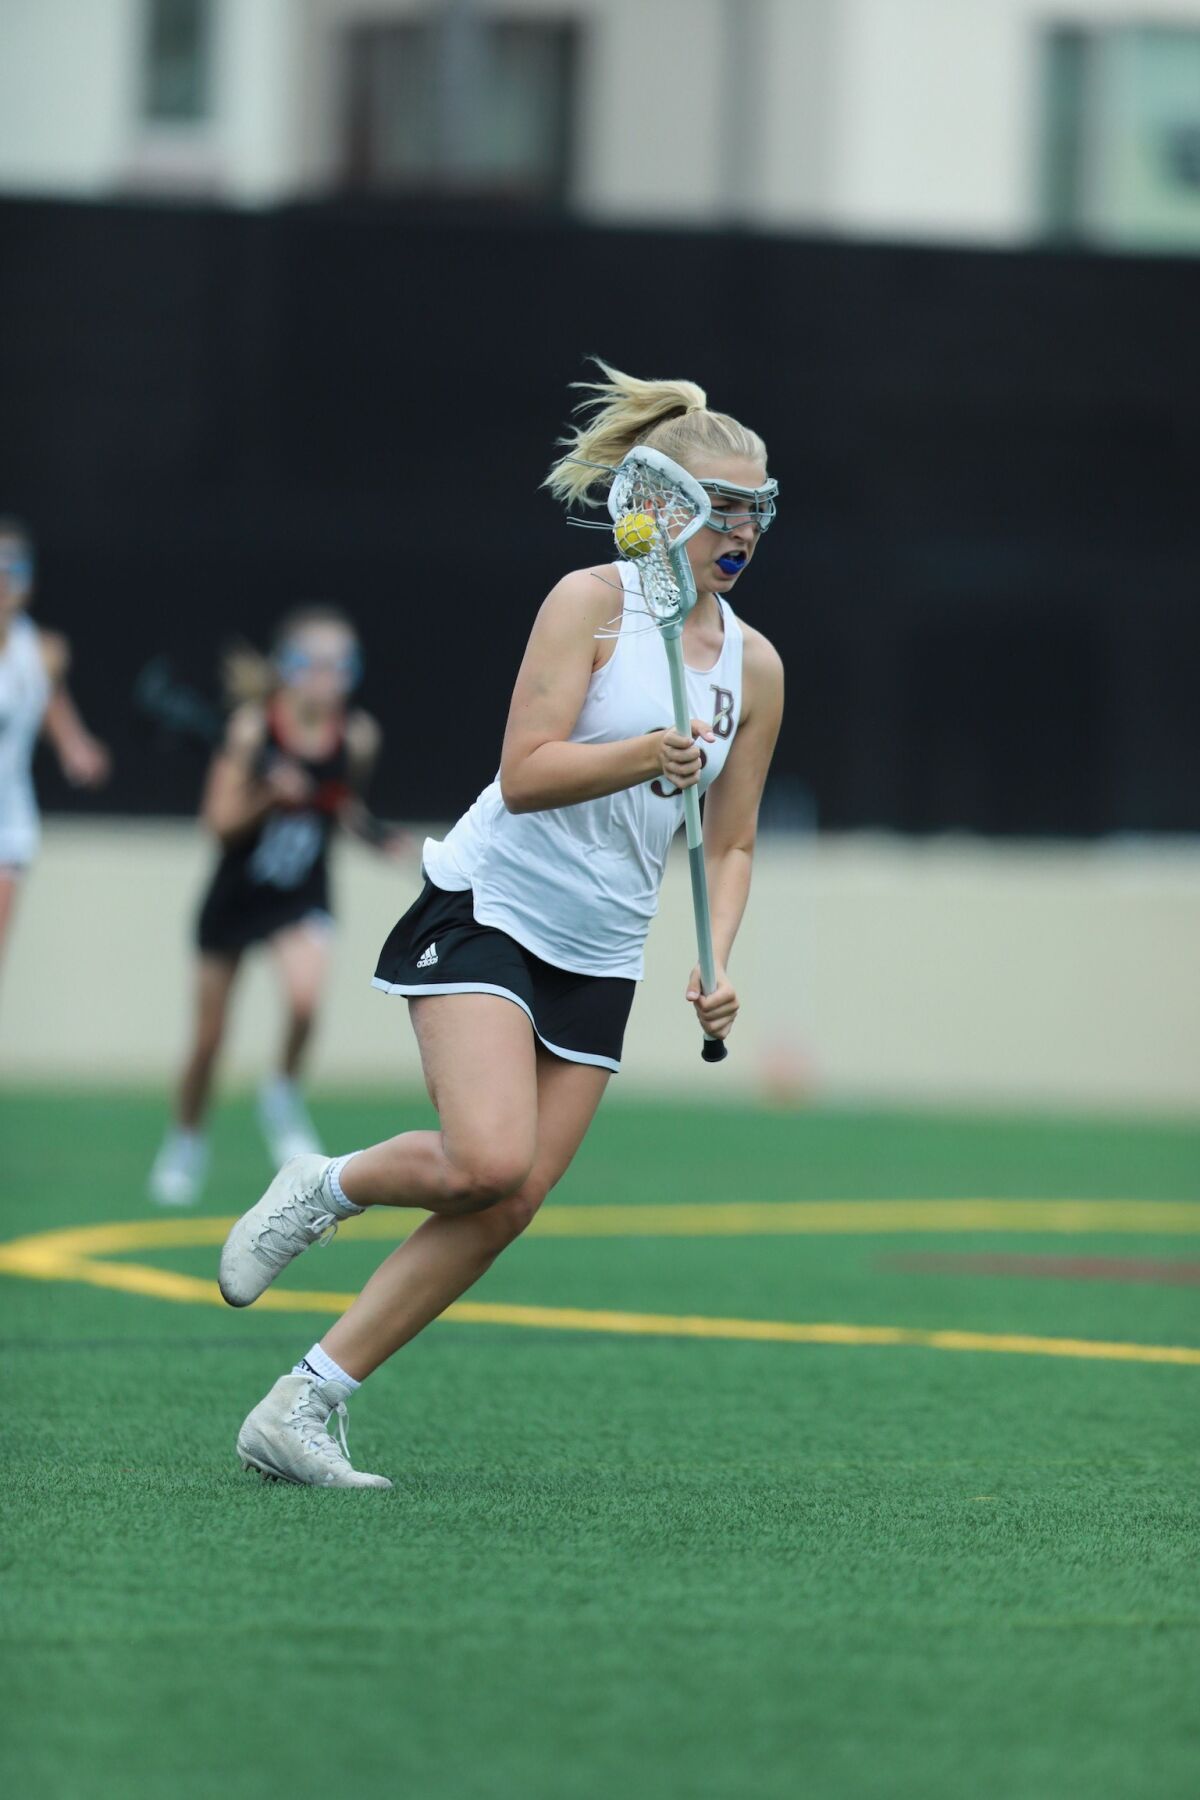 Bishop's School sophomore Erika Pfister is an athlete in three sports: lacrosse, field hockey and water polo.